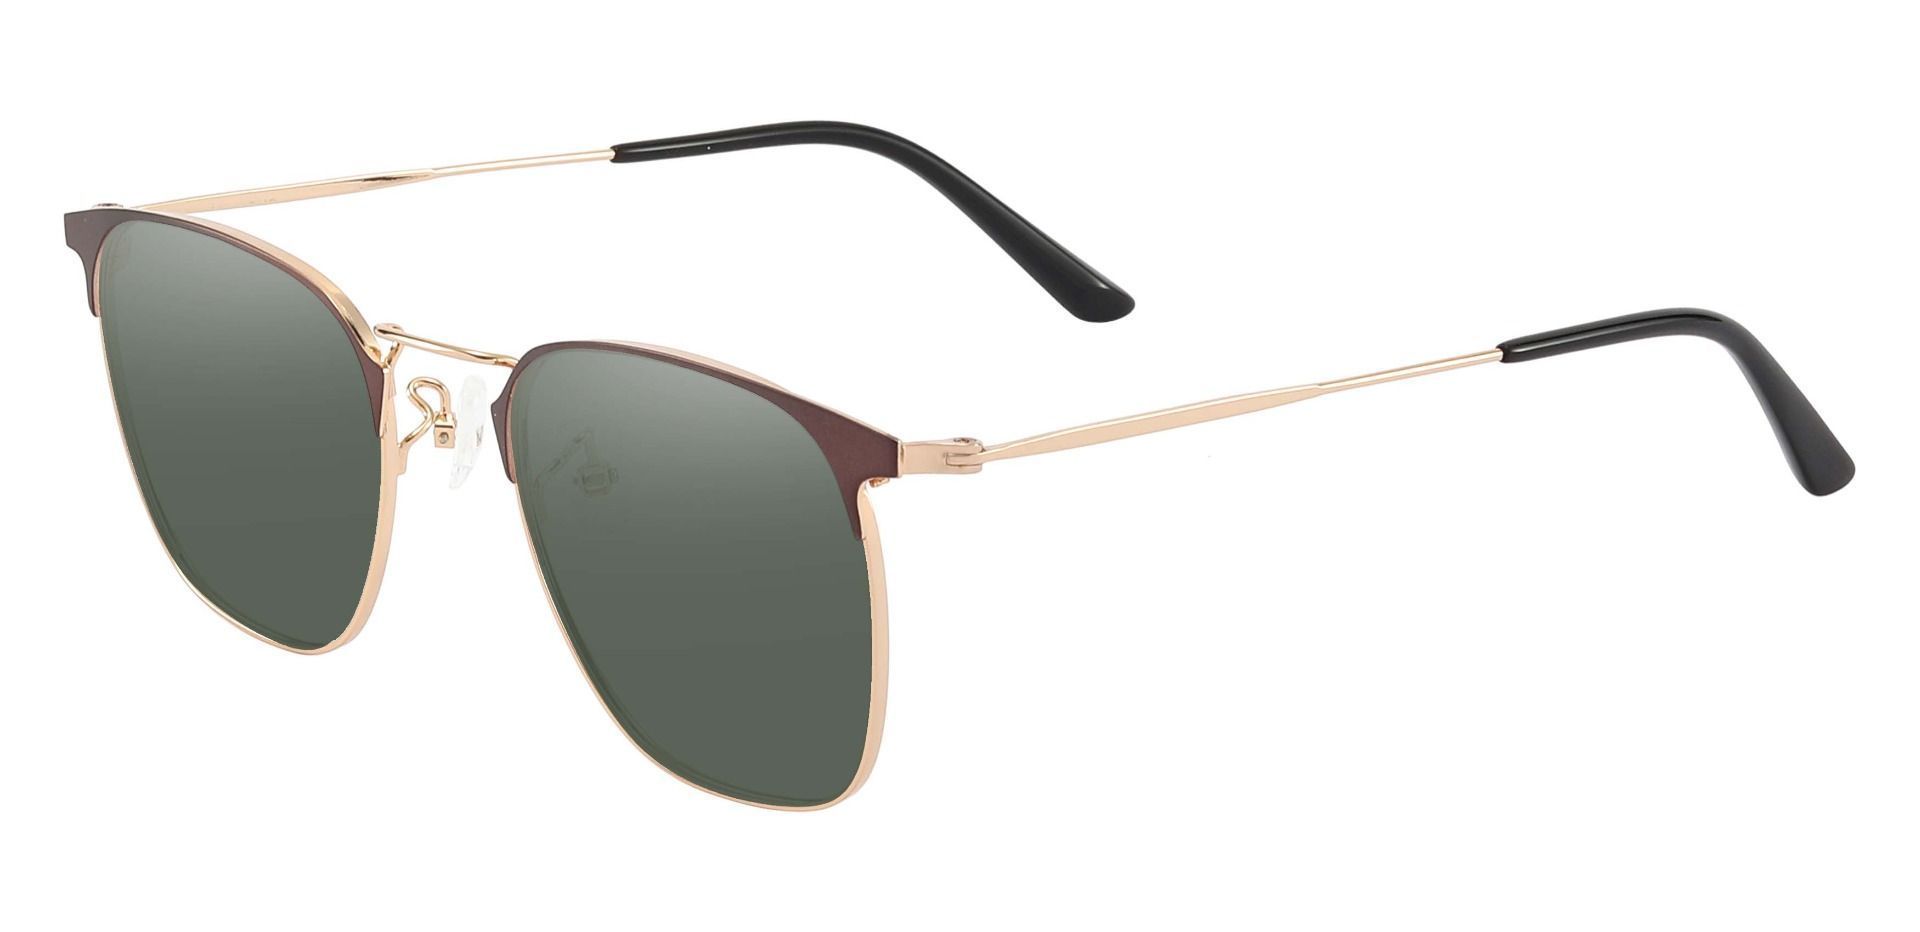 Nichols Browline Non-Rx Sunglasses - Brown Frame With Green Lenses